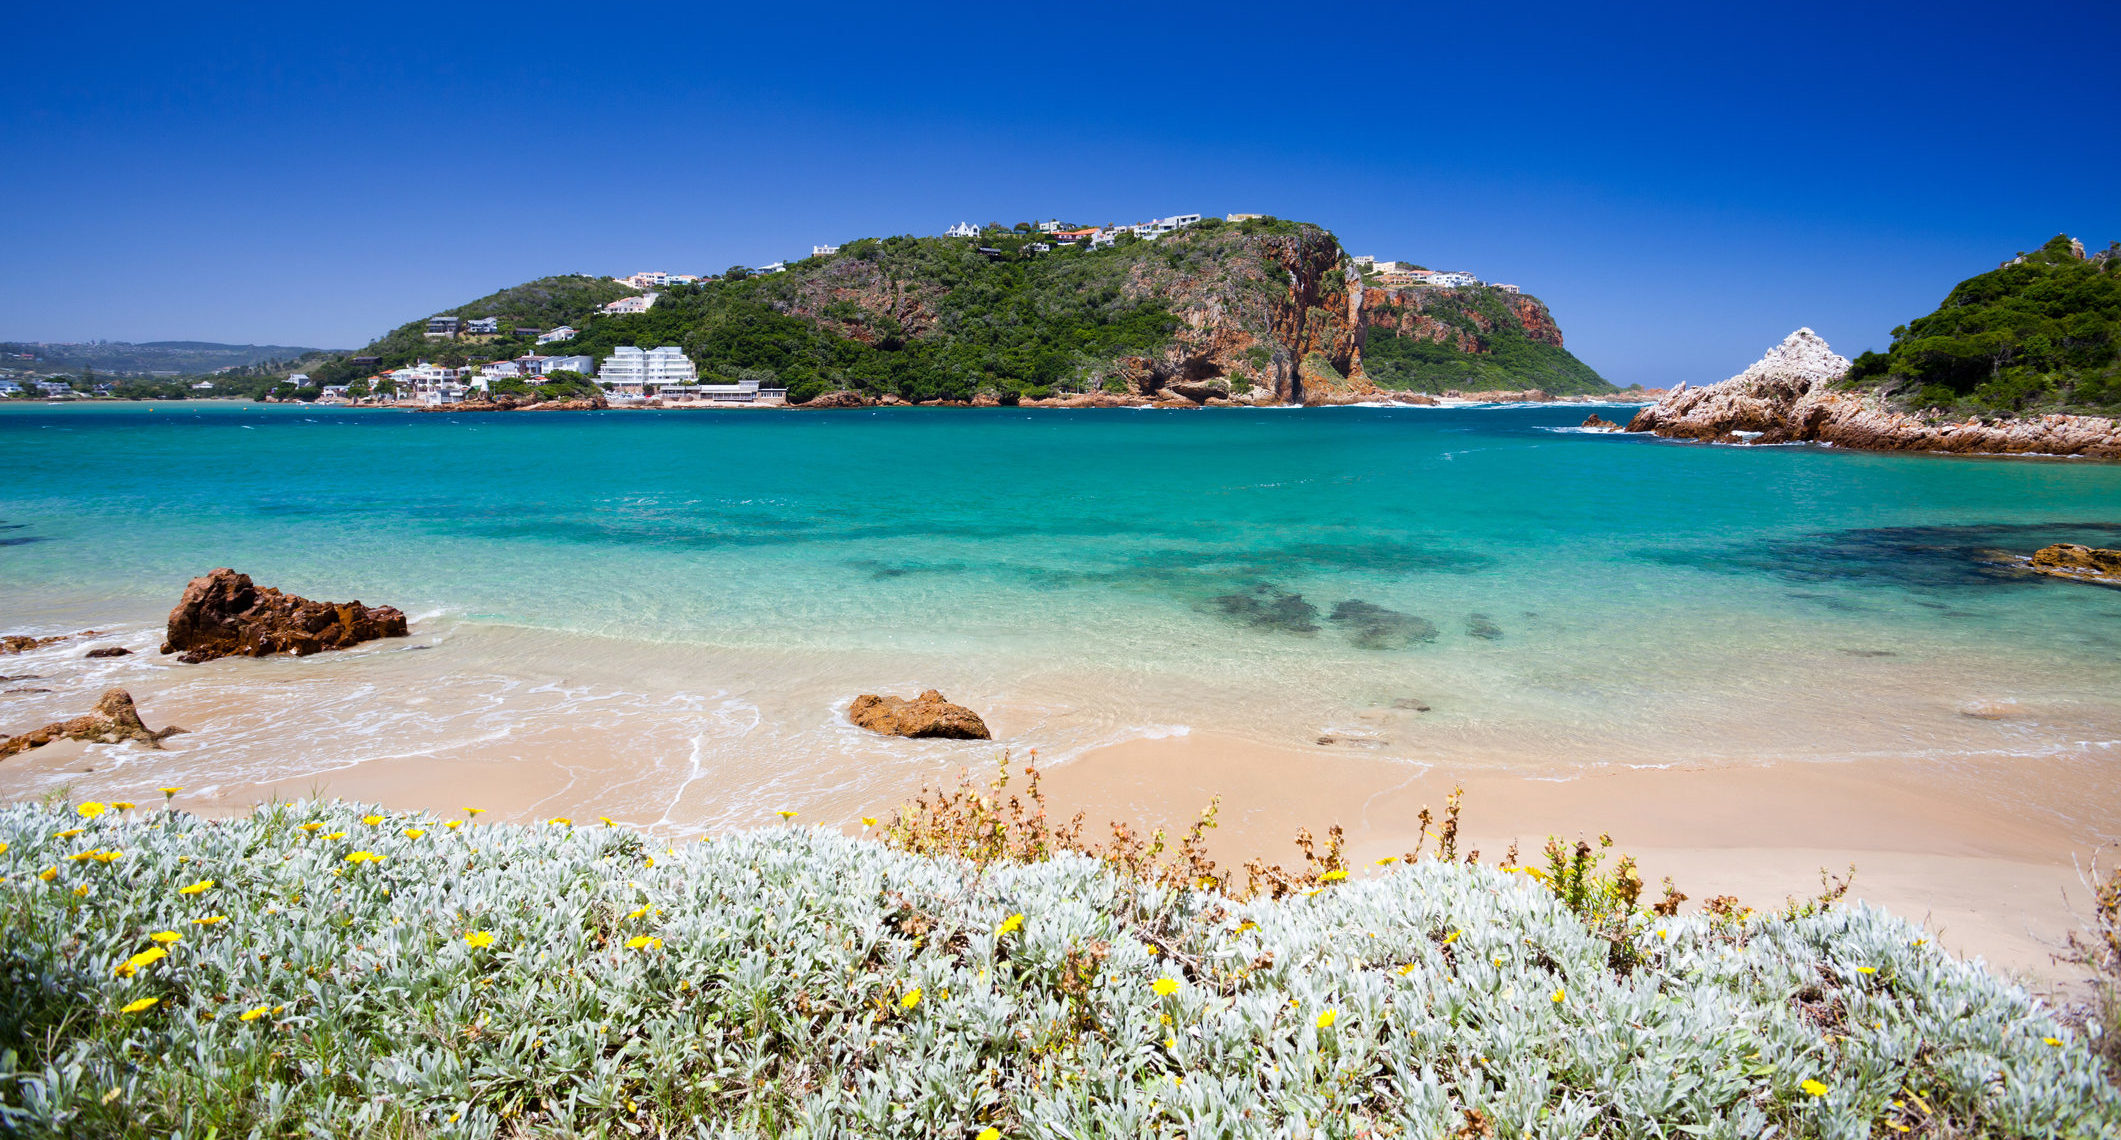 Discover remarkable South African sights like this beautiful view of Knysna beach when you take a tailor-made holiday with Alfred&.